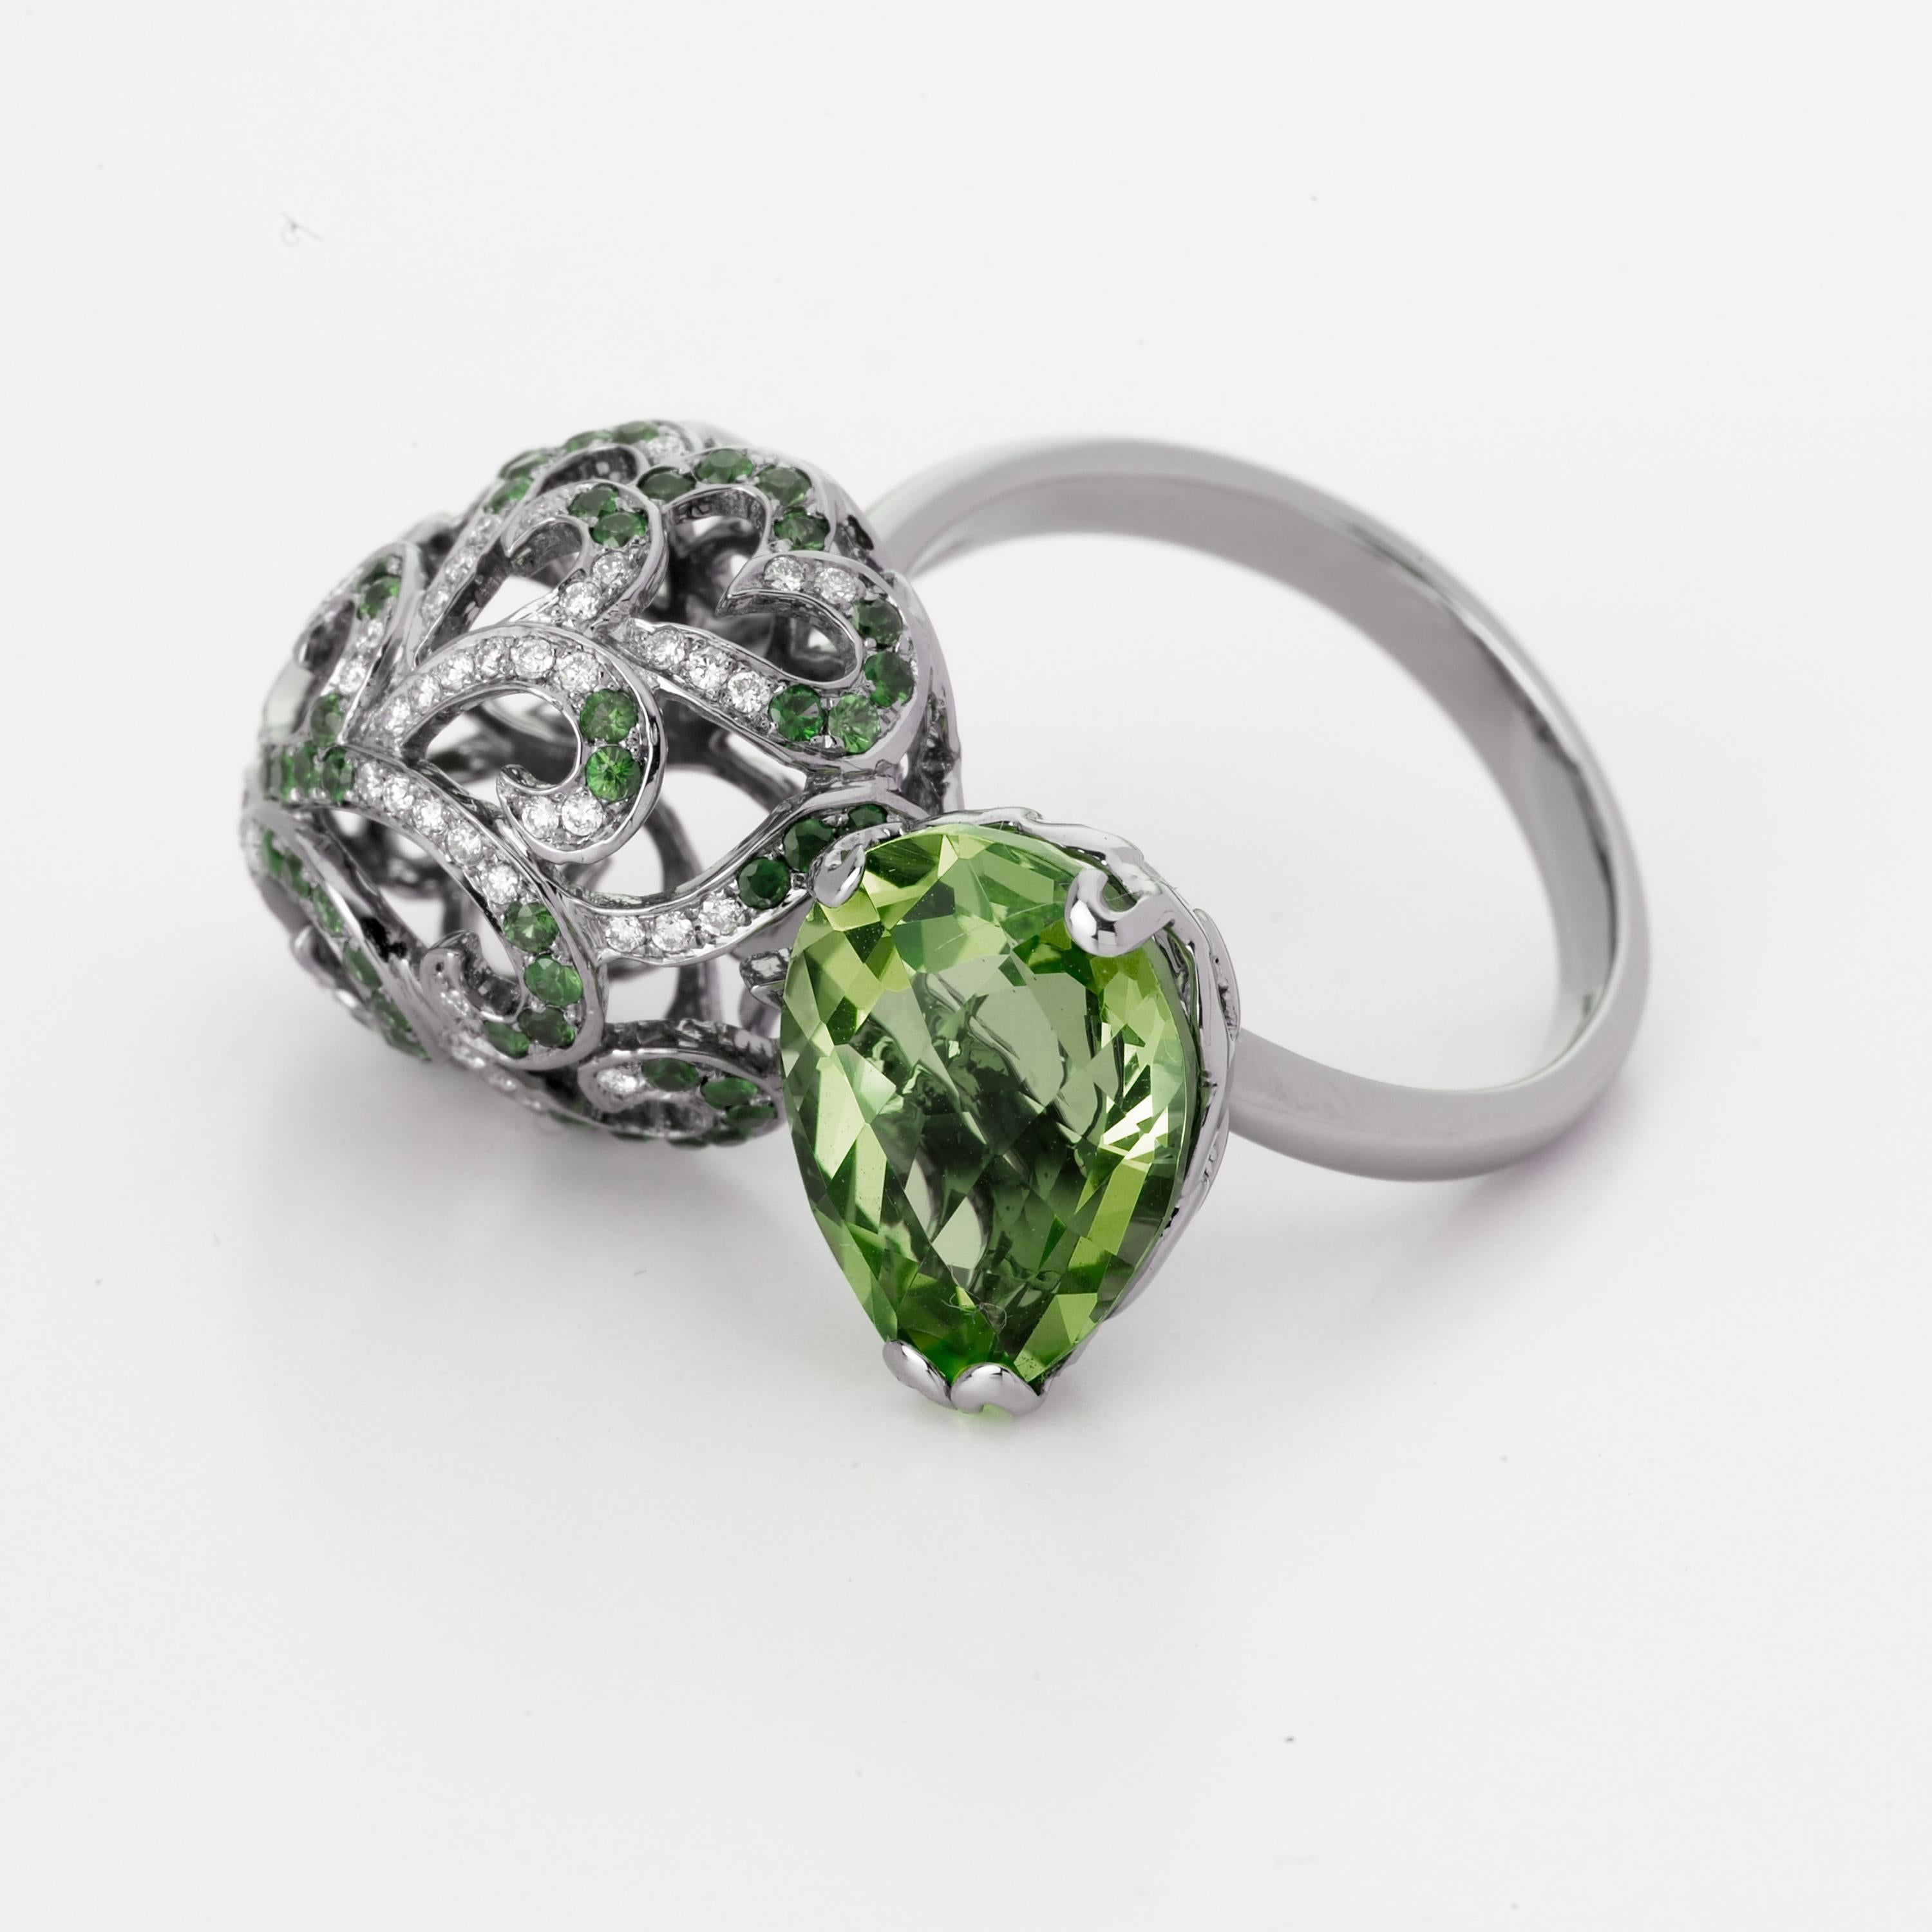 Description:
Whispering large double ring with 4.5ct green amethyst, 0.3ct white diamonds and 0.2ct green garnets, set in black rhodium plate on 18ct white gold.

Inspiration:
Emulating femininity and glamour, the Whispering collection is full of